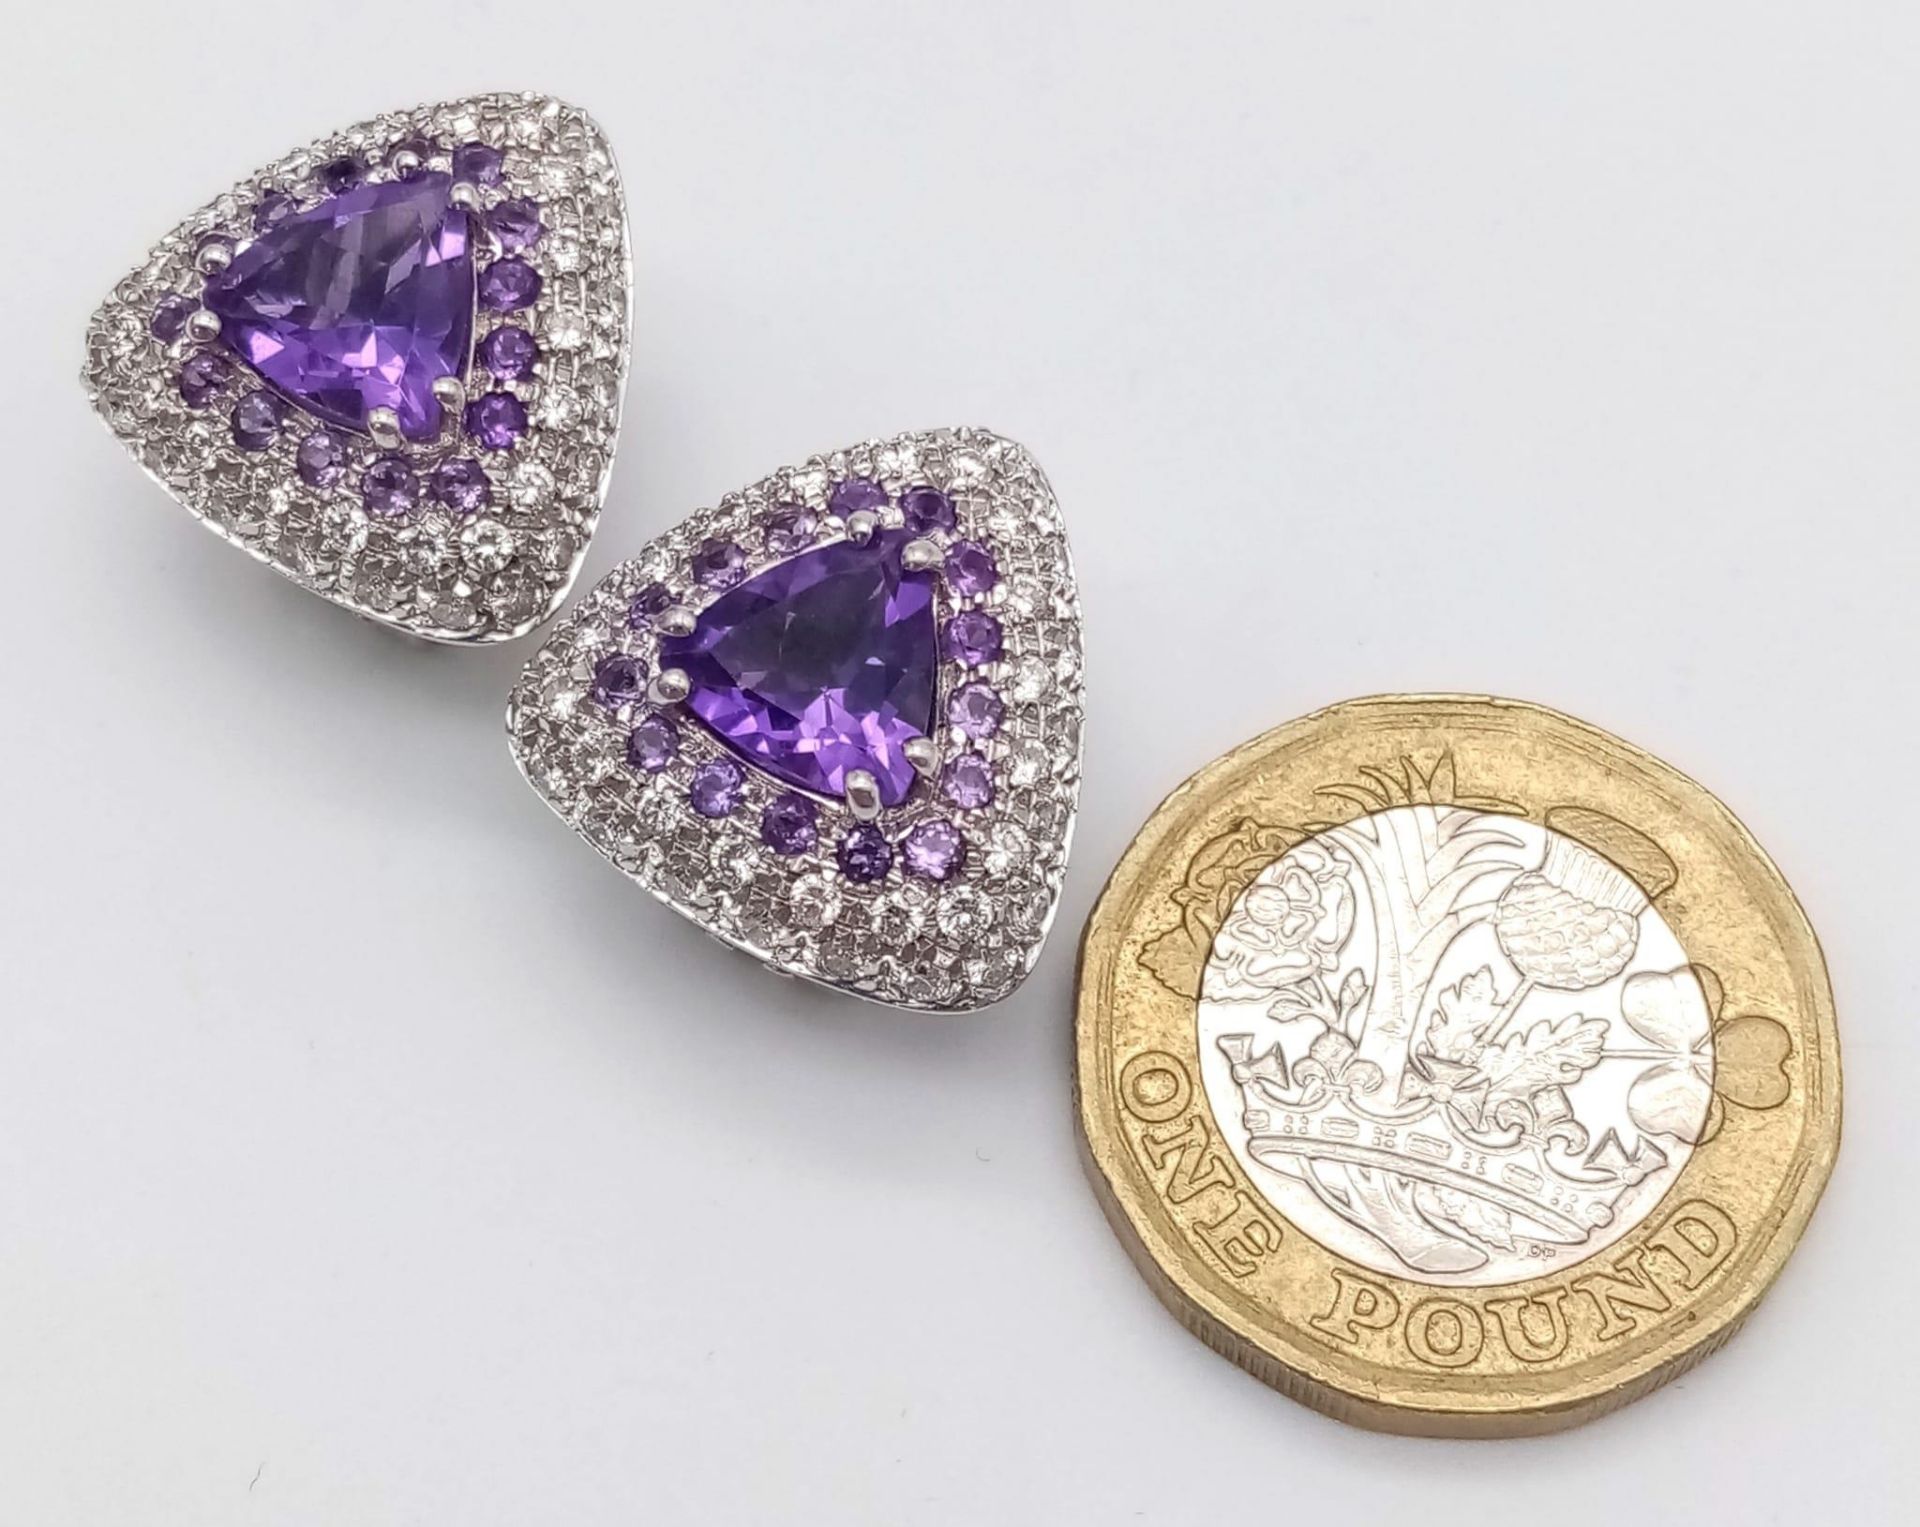 A FABULOUS 18K WHITE GOLD DIAMOND AND AMETHYST RING WITH MATCHING EARRINGS . 35.5gms - Image 11 of 12